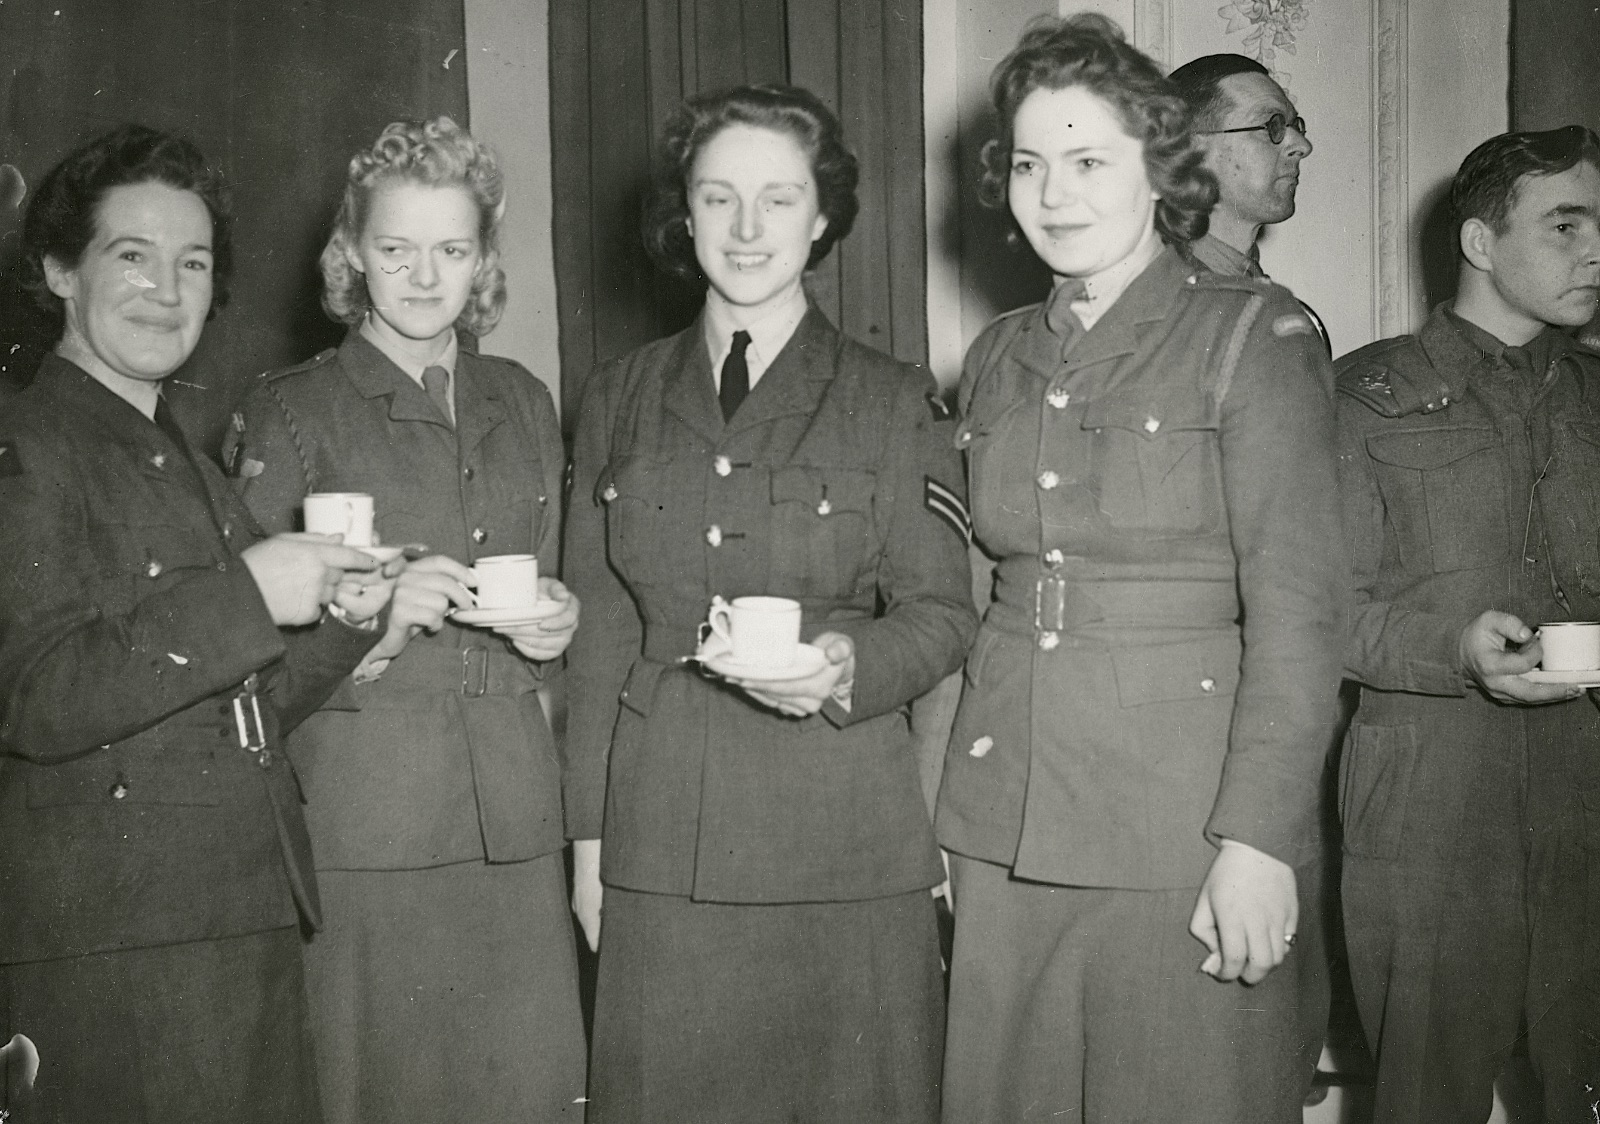 On 22 December 1942, the Danish Minister, in London, Count E. Reventlow and his wife gave a reception for Danish volunteers at the Danish House in Pond Street. From left it is Mary Kraul, an unidentified A.T.S, Cpl Gerda Gormsen Hansen, and another unidentified A.T.S. (Museum of Danish Resistance)